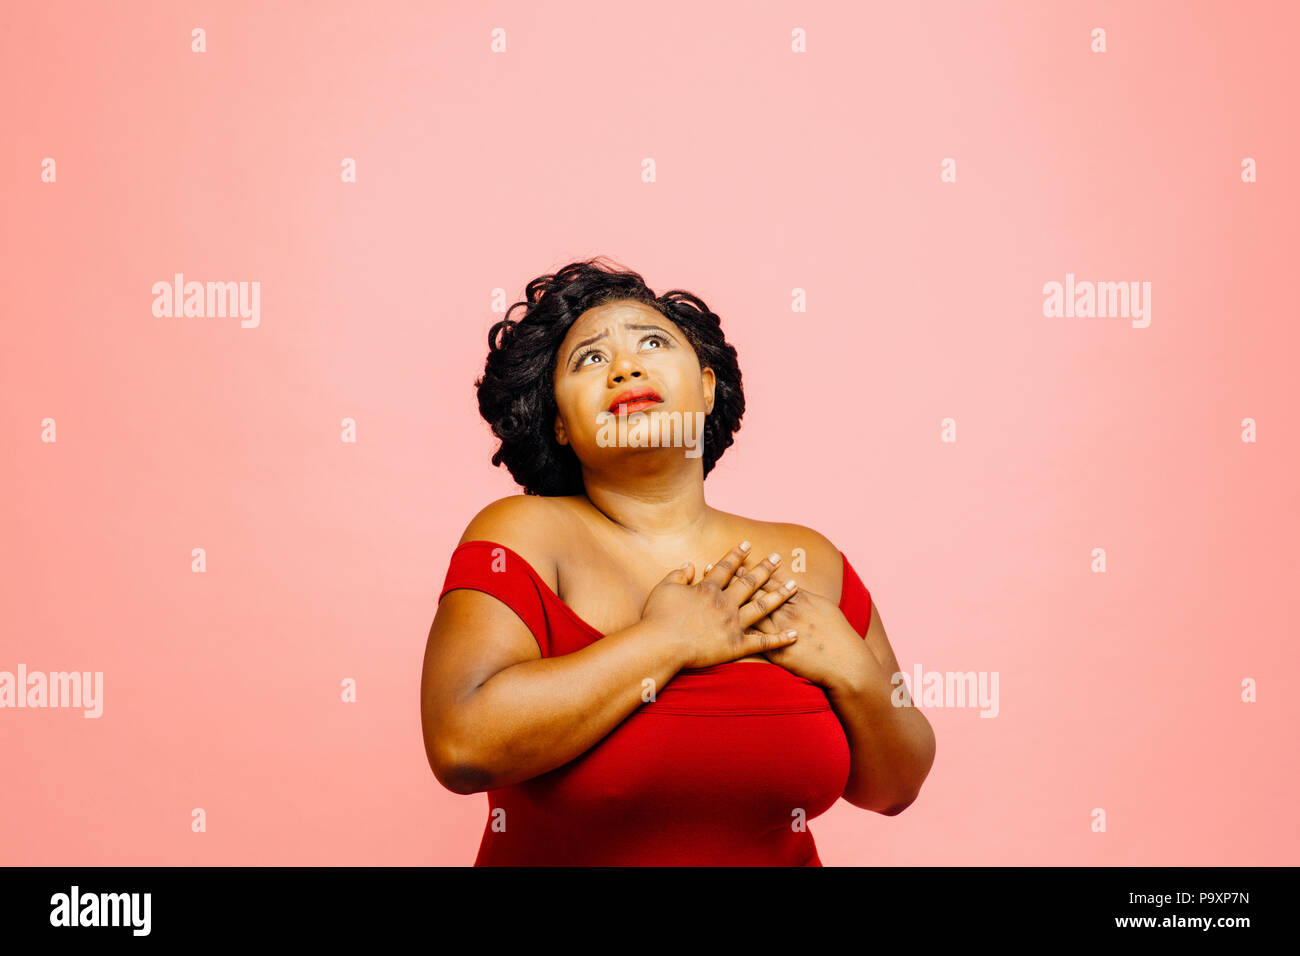 Woman holding her chest and looking up full of emotion, isolated on pink background Stock Photo